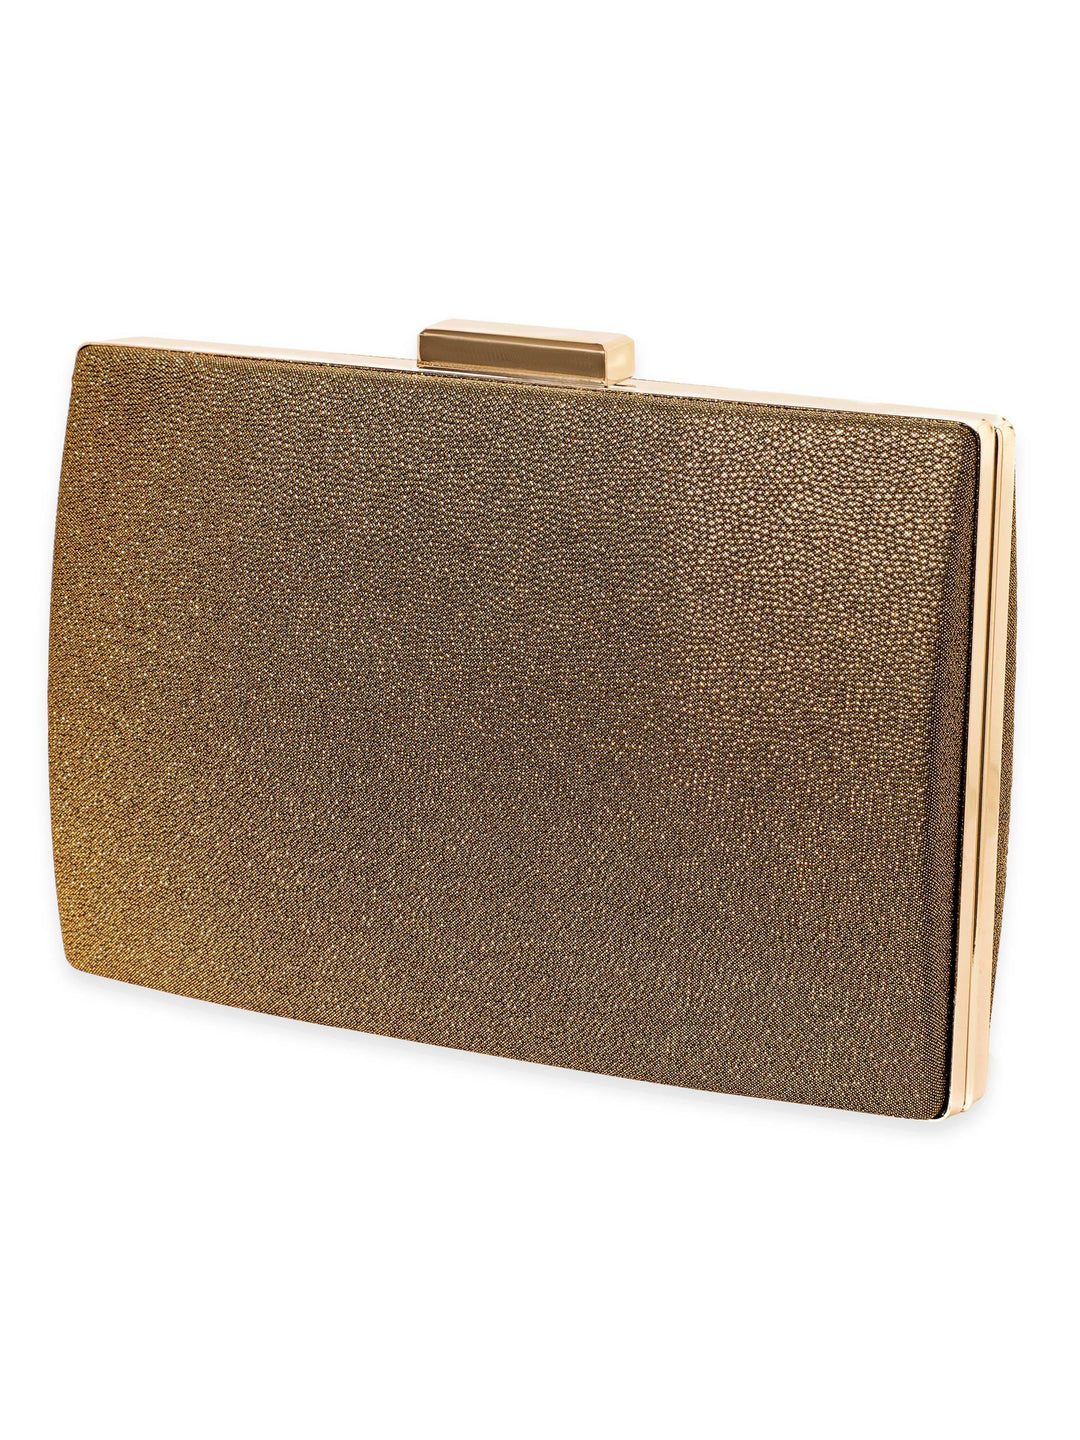 Rubans Gilded Glamour Handcrafted Shimmery Clutch Bag Handbag, Wallet Accessories & Clutches